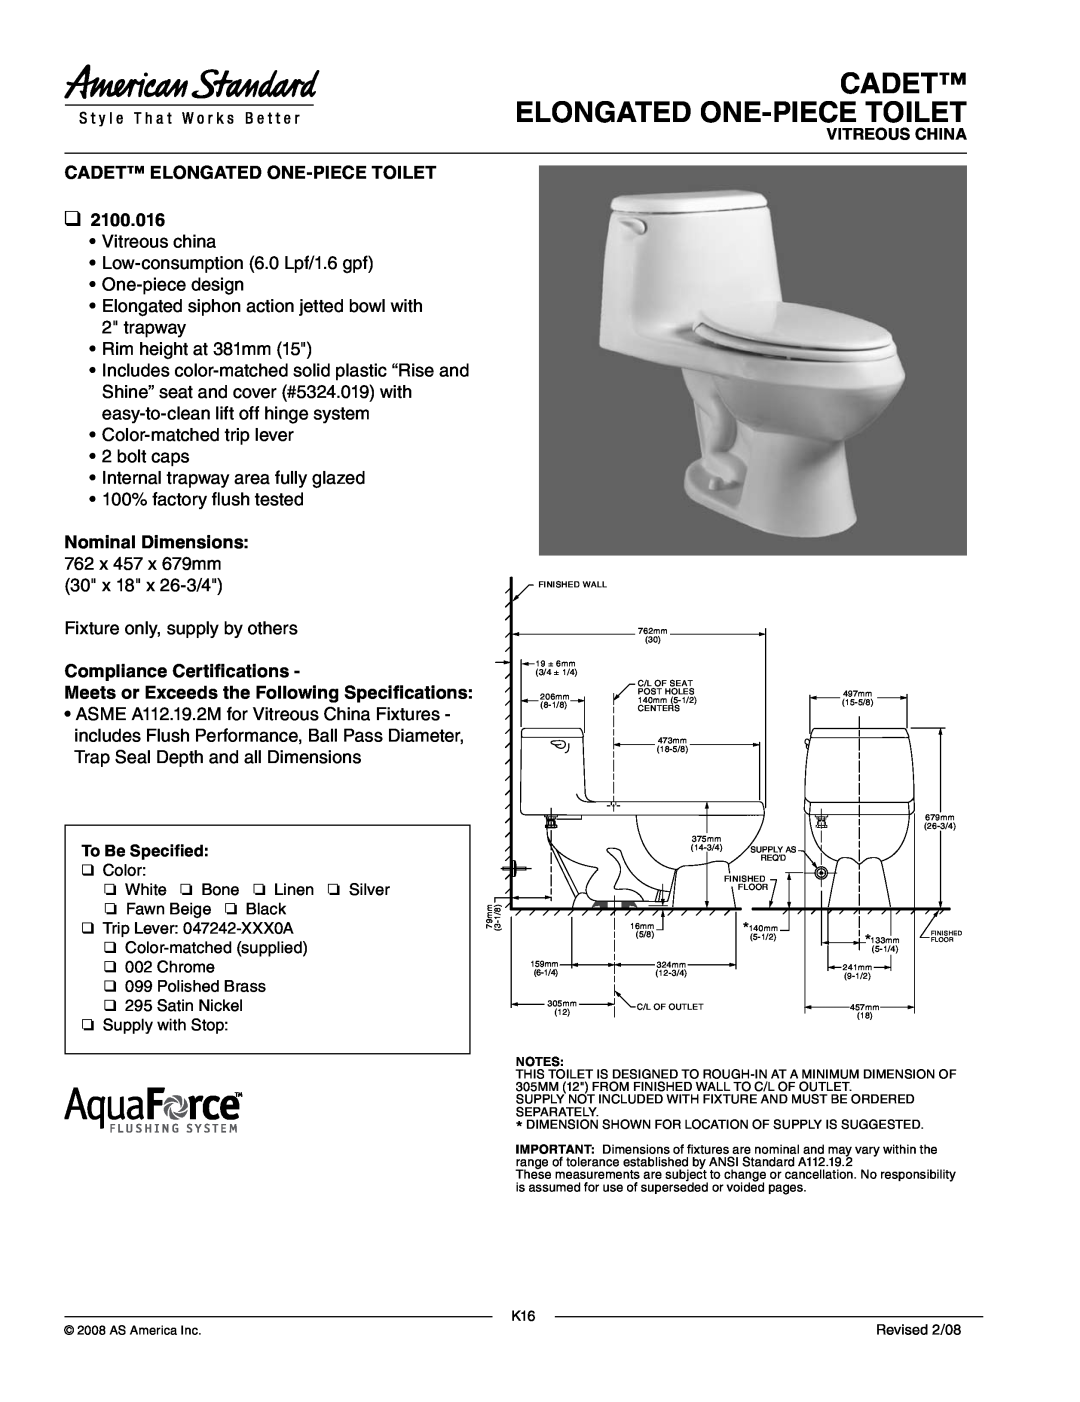 American Standard 2100.016 dimensions Cadet Elongated One-Piecetoilet, Nominal Dimensions, Compliance Certifications 